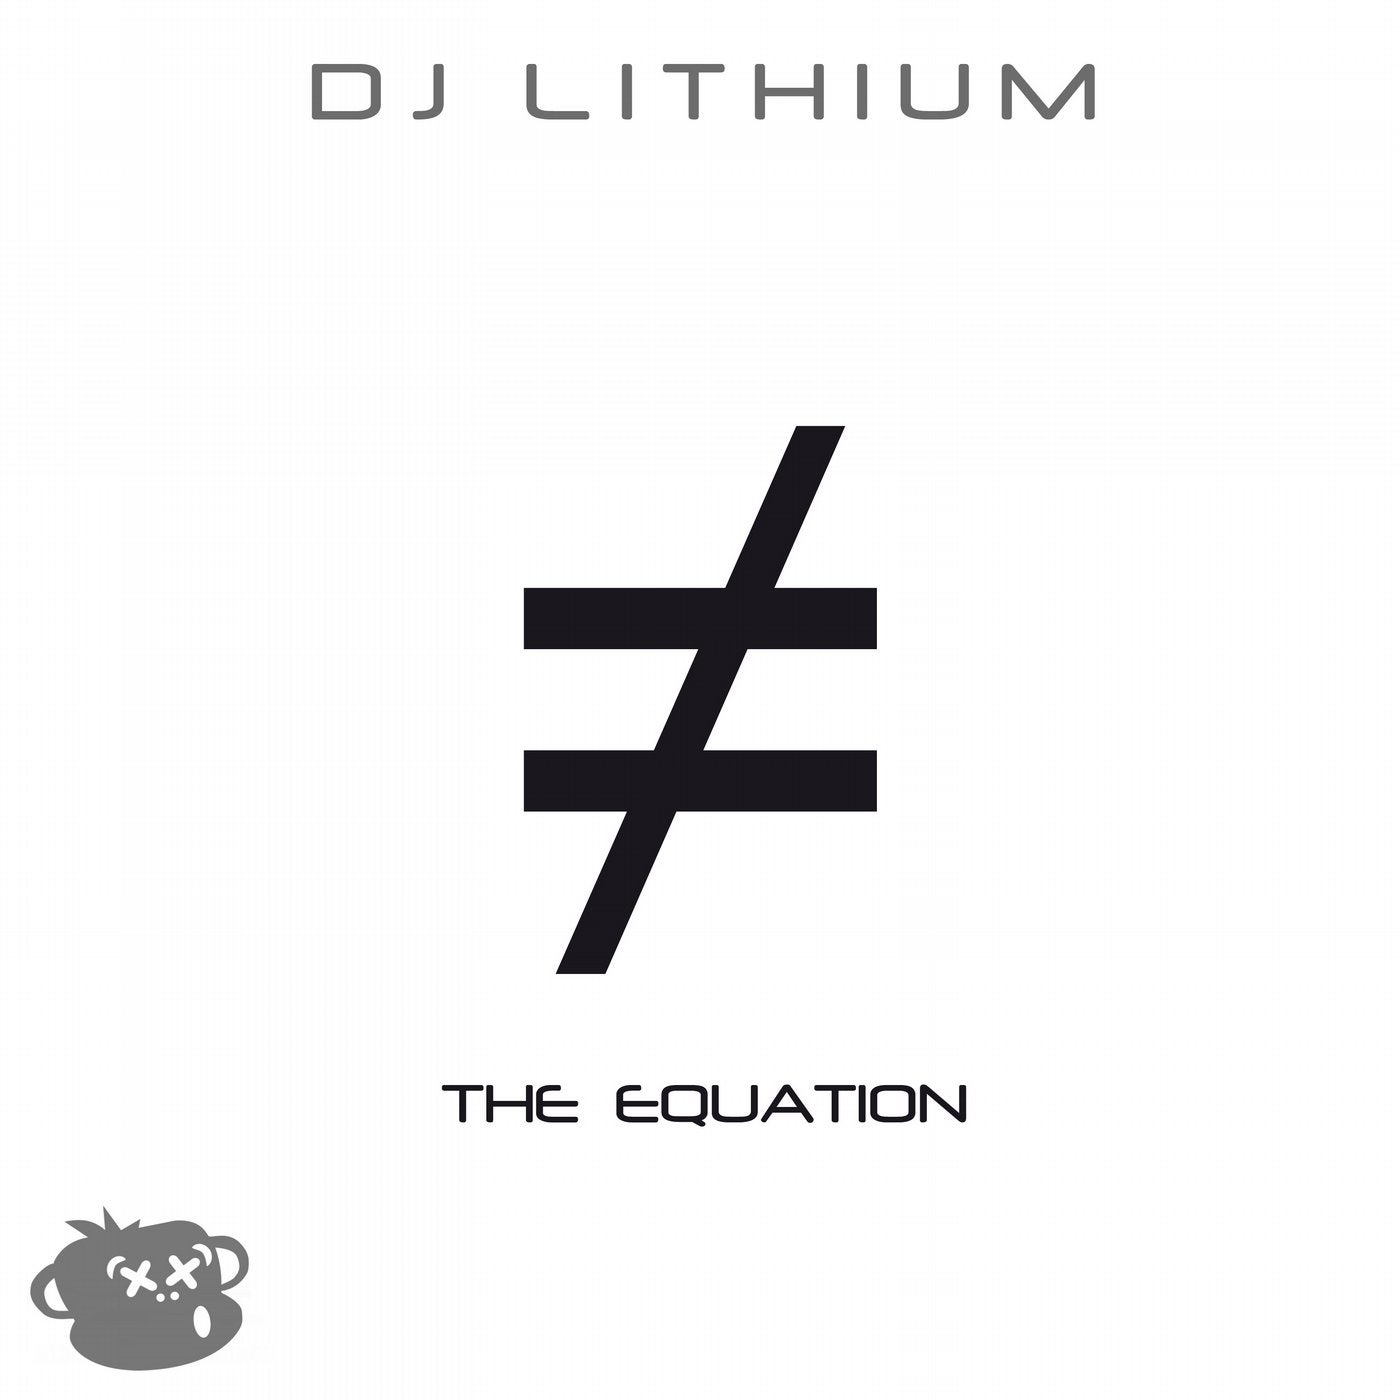 The Equation